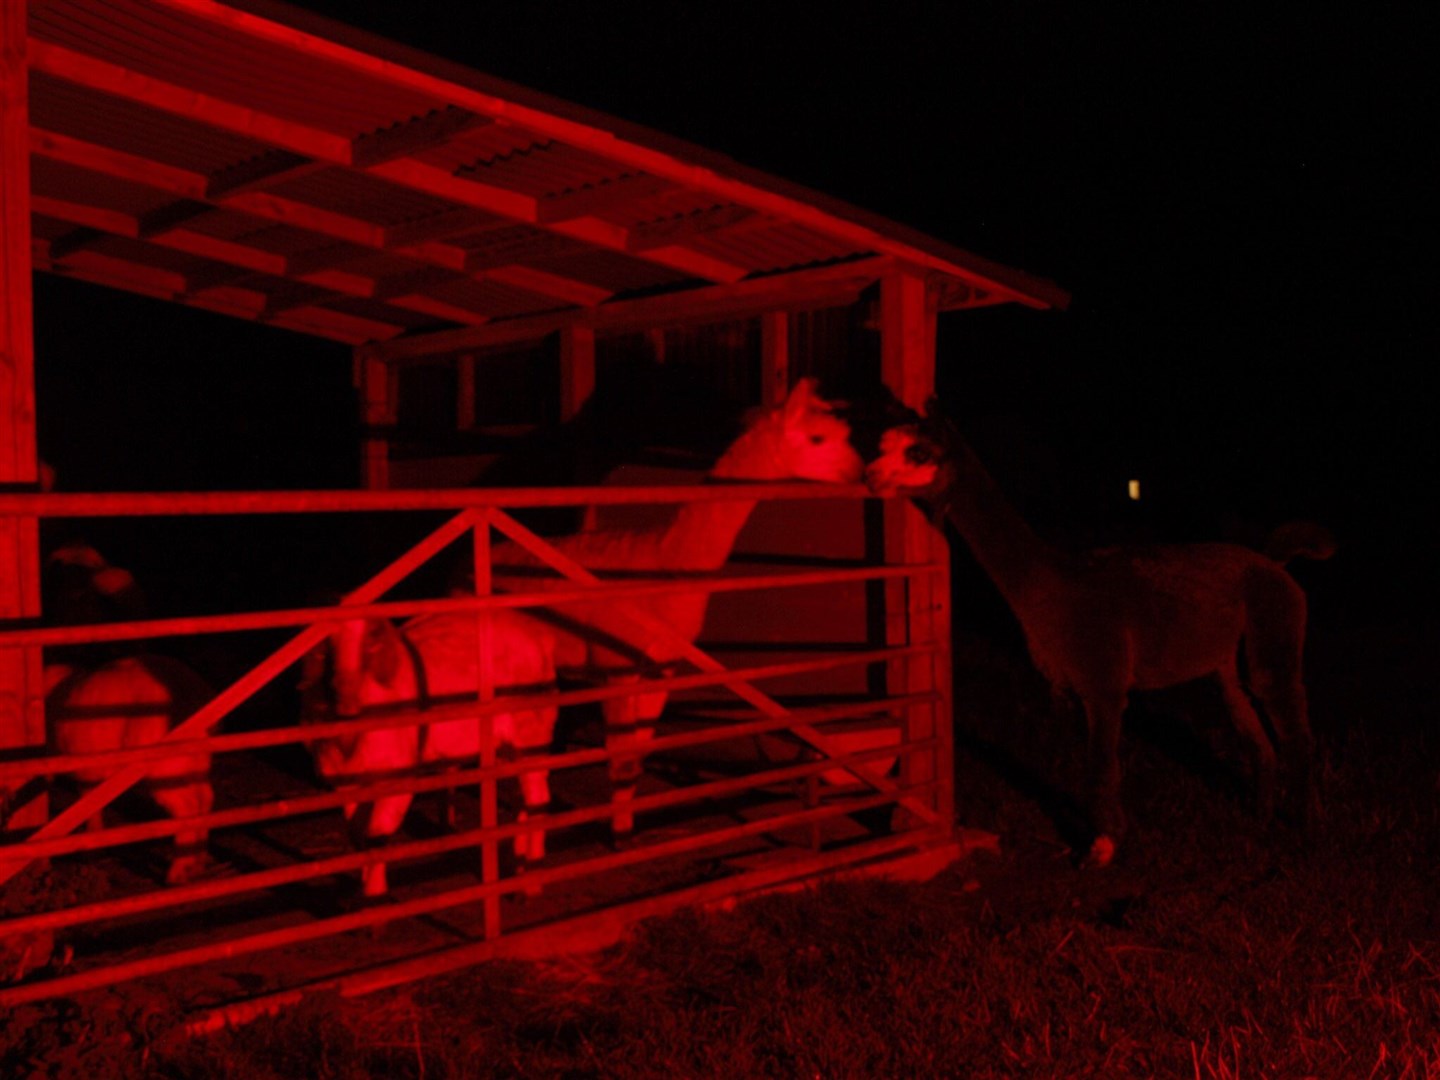 Elchies of Speyside farm lit up red last year.